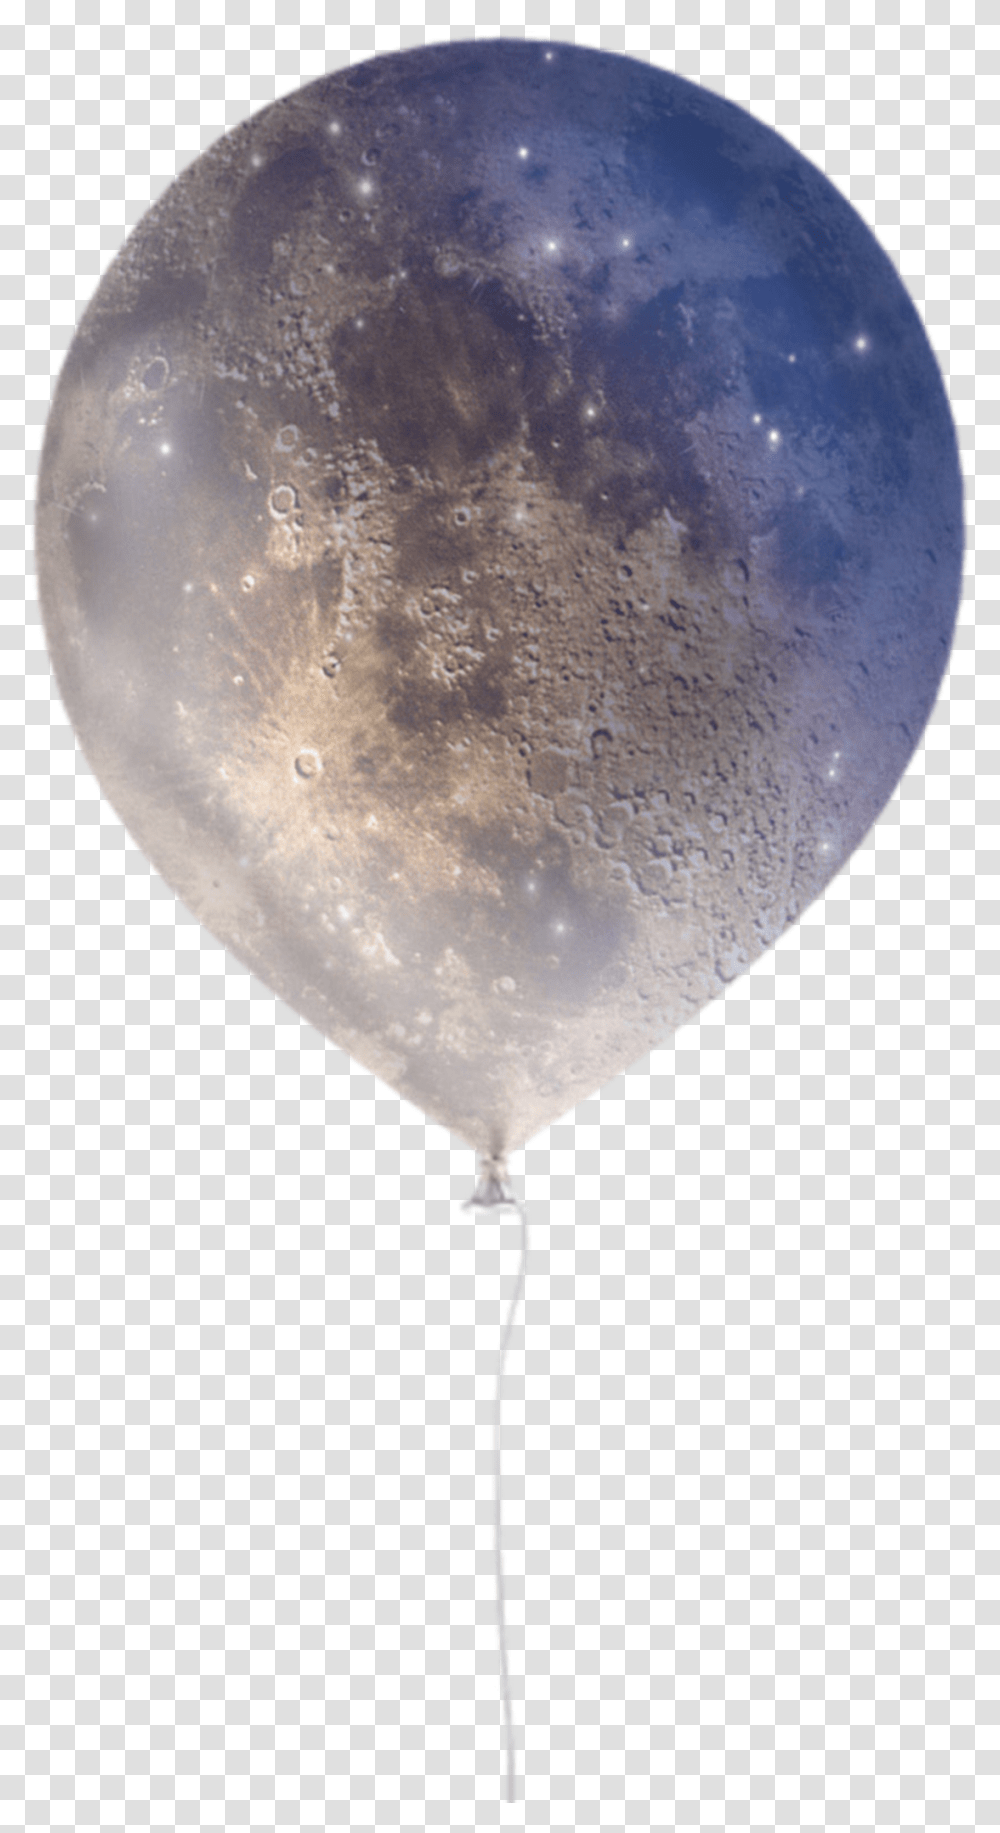 Moon Balloon Sticker By Jacqueline Balloon, Outer Space, Night, Astronomy, Outdoors Transparent Png